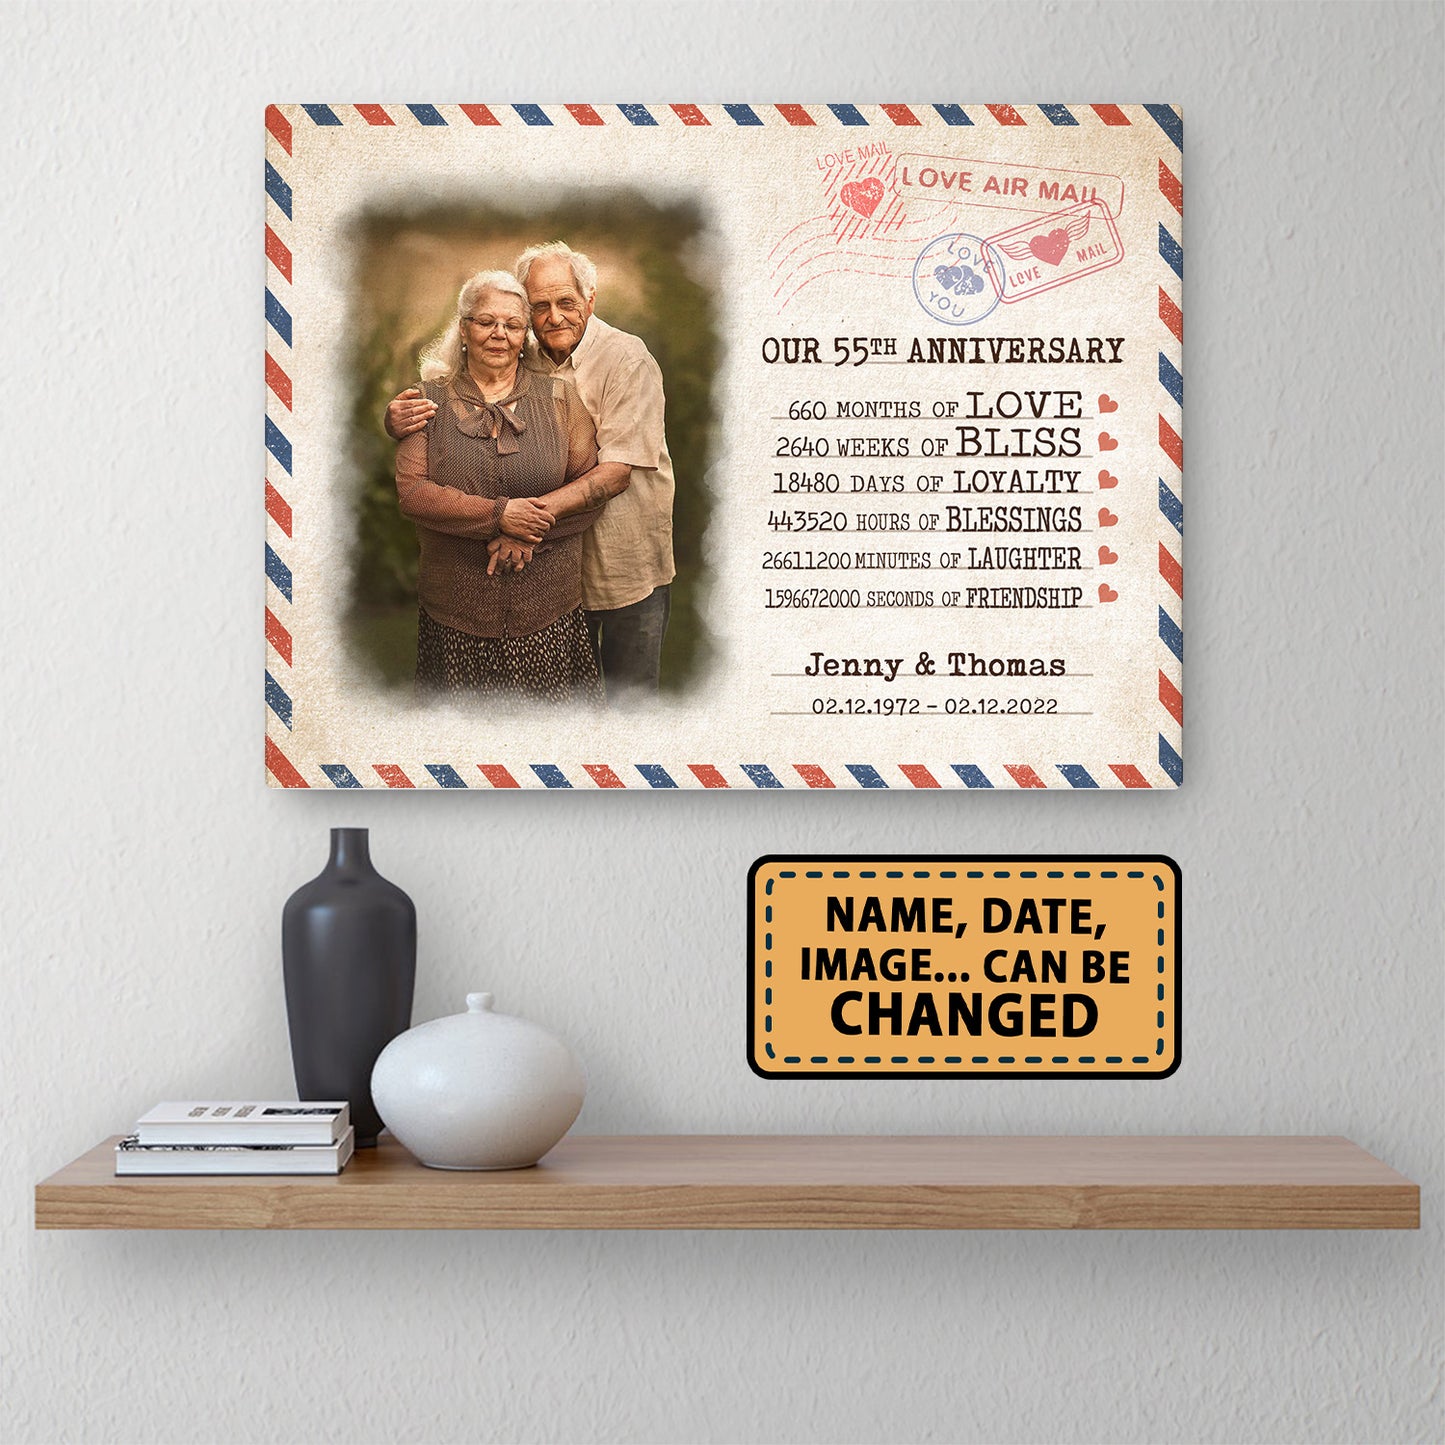 Our 55th Anniversary Letter Valentine Gift Personalized Canvas